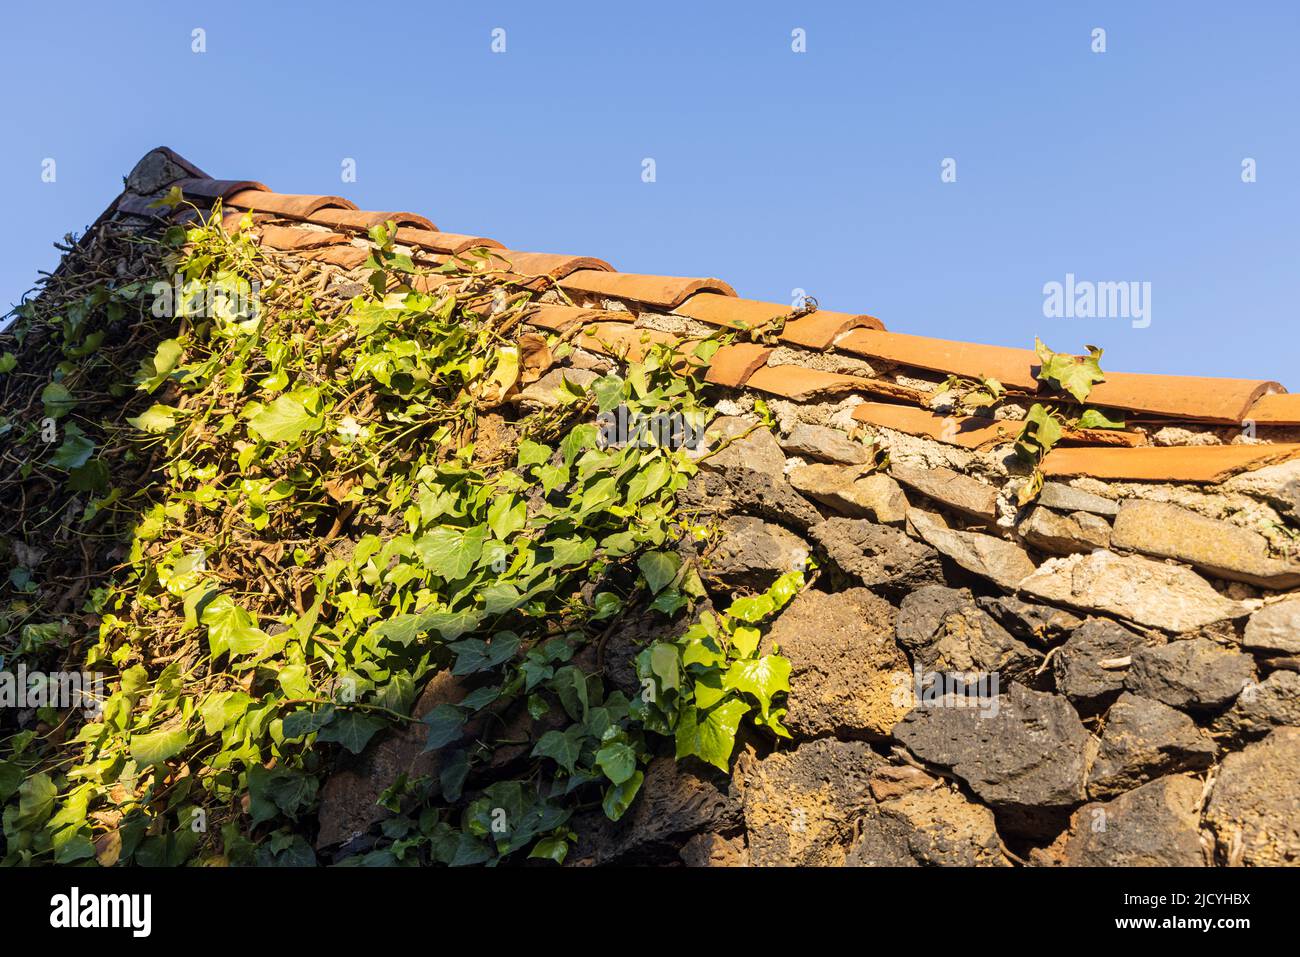 Roof detail with red tiles and stone walls, Rural hotel, Caserio Los Partidos, El Tanque, near Santiago del Teide in Tenerife, Canary Islands, Spain Stock Photo